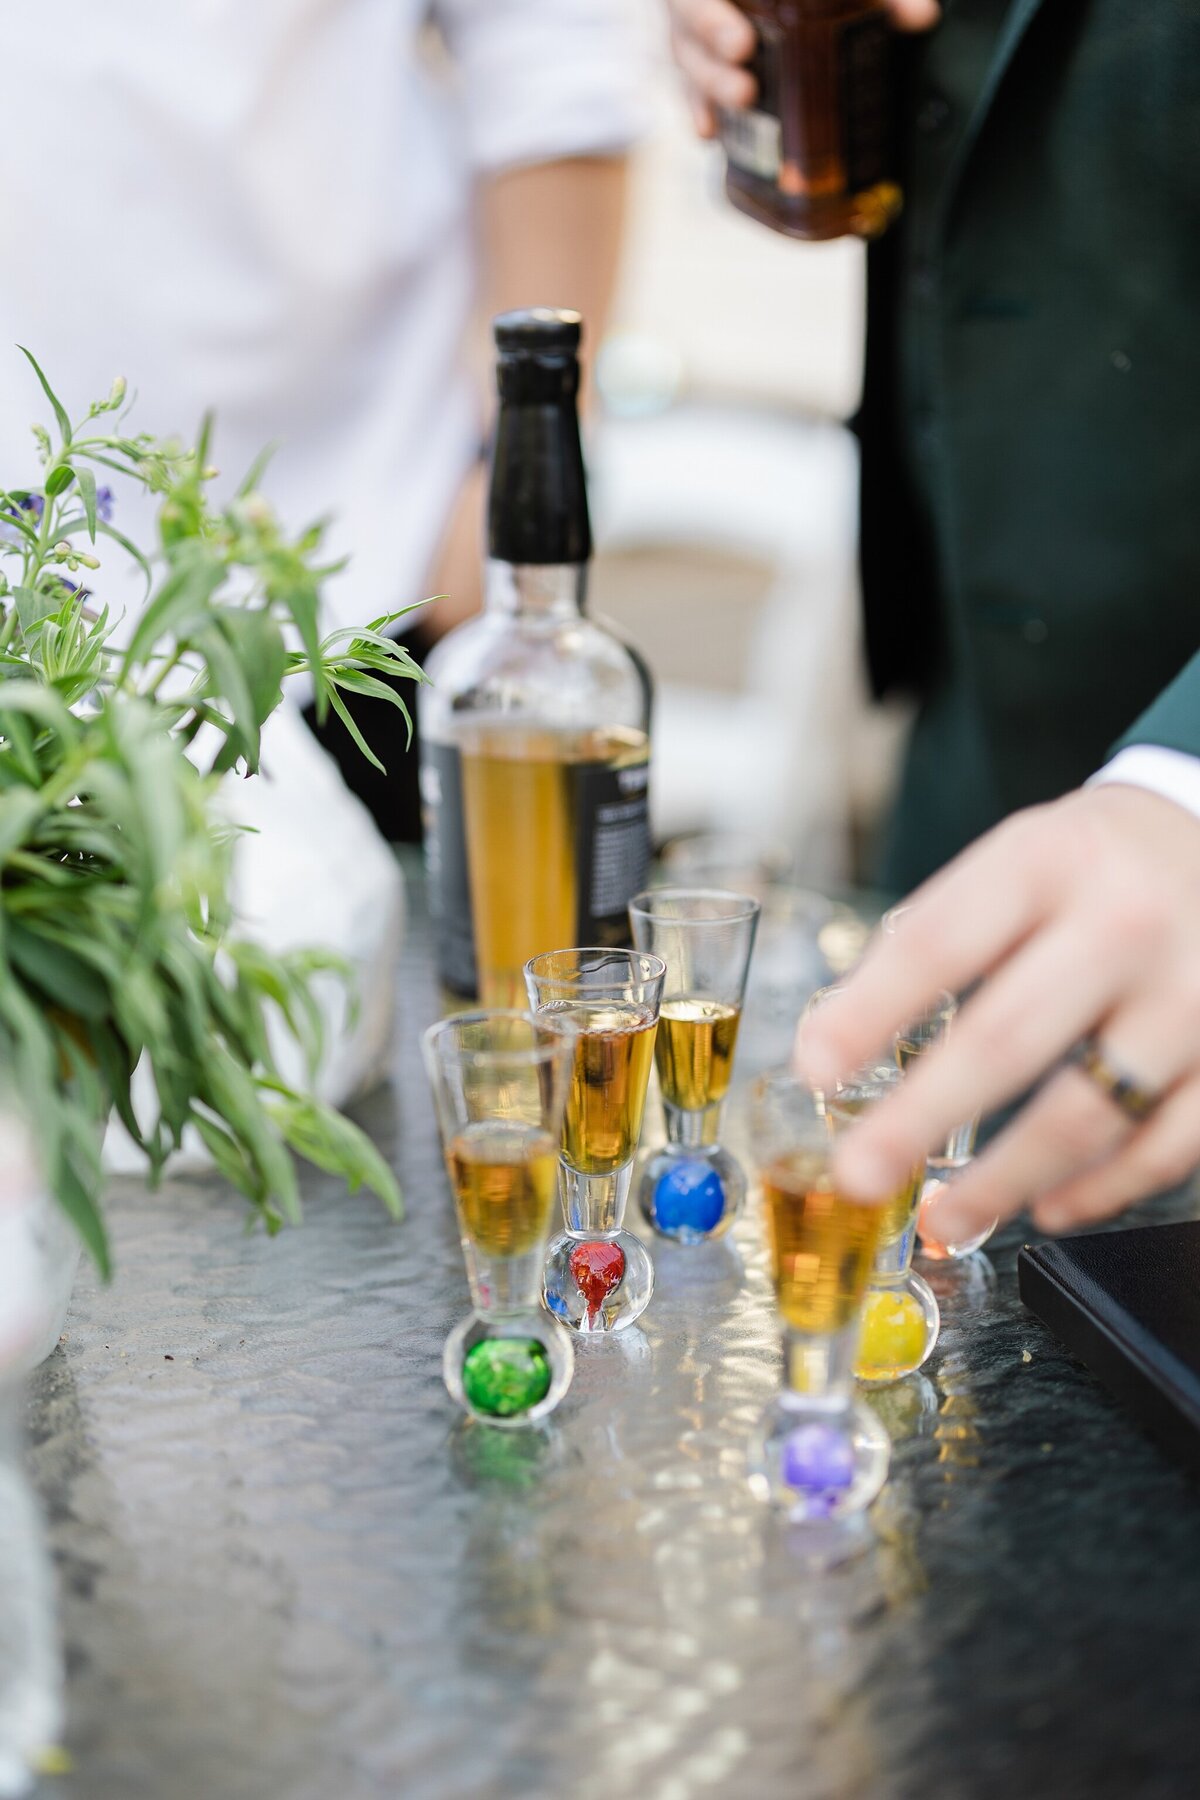 A detail shot of shot glasses being filled during a wedding reception in Dallas, Texas. Each shot glass is filled with dark liquor and is the bottom of each shot glass contains a glass sphere of a different color. A liquor bottle can be seen behind the group of shot glasses.